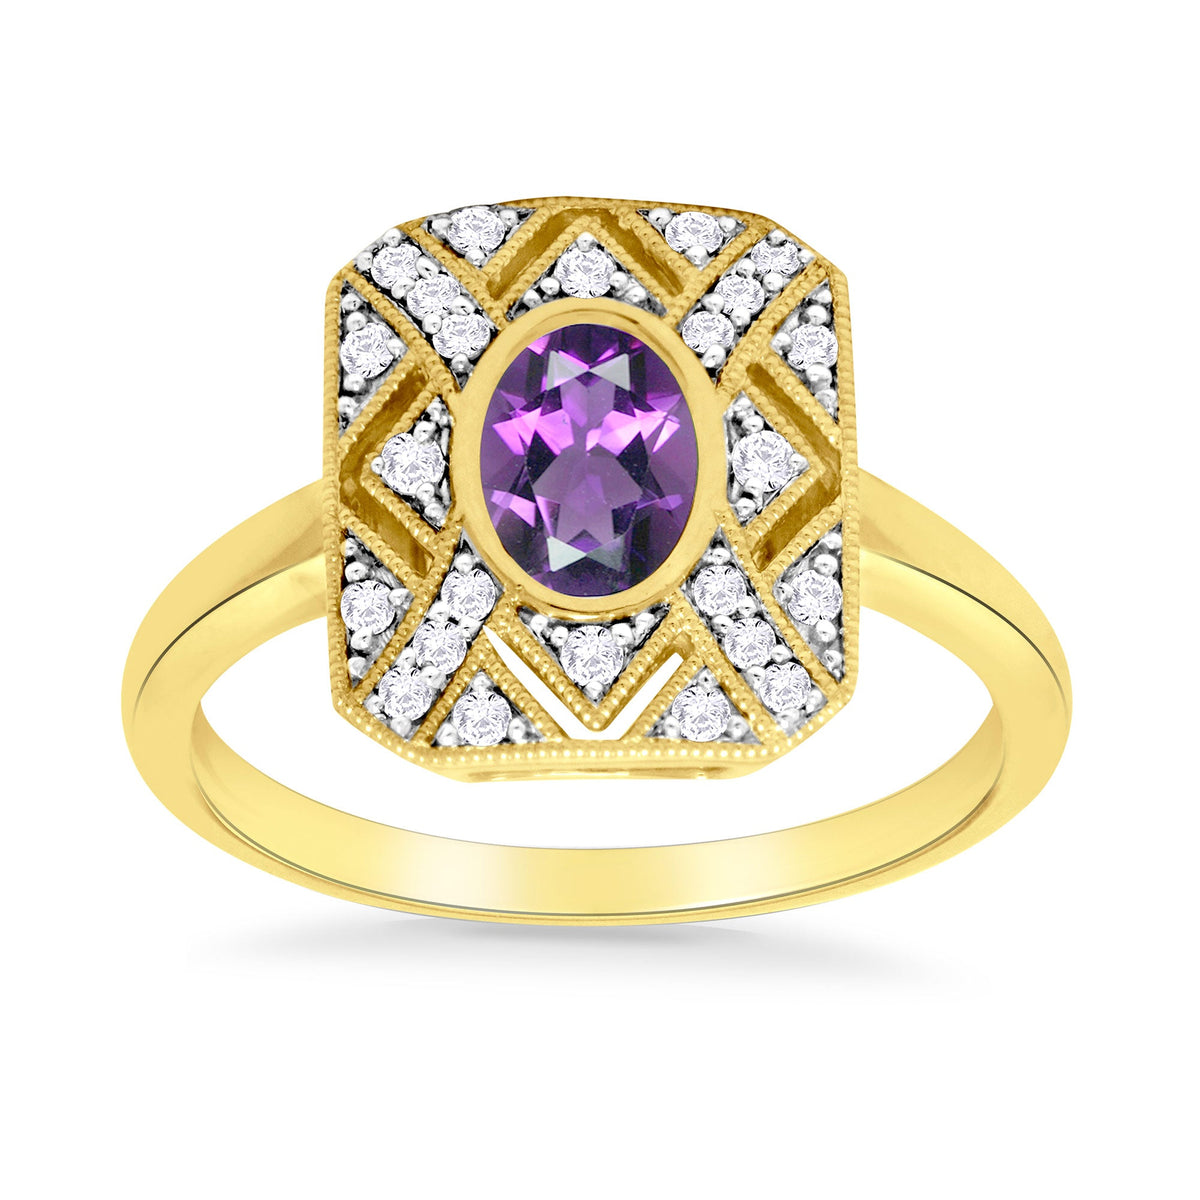 9ct gold 7x5mm oval amethyst &amp; antique style diamond cluster ring 0.17ct